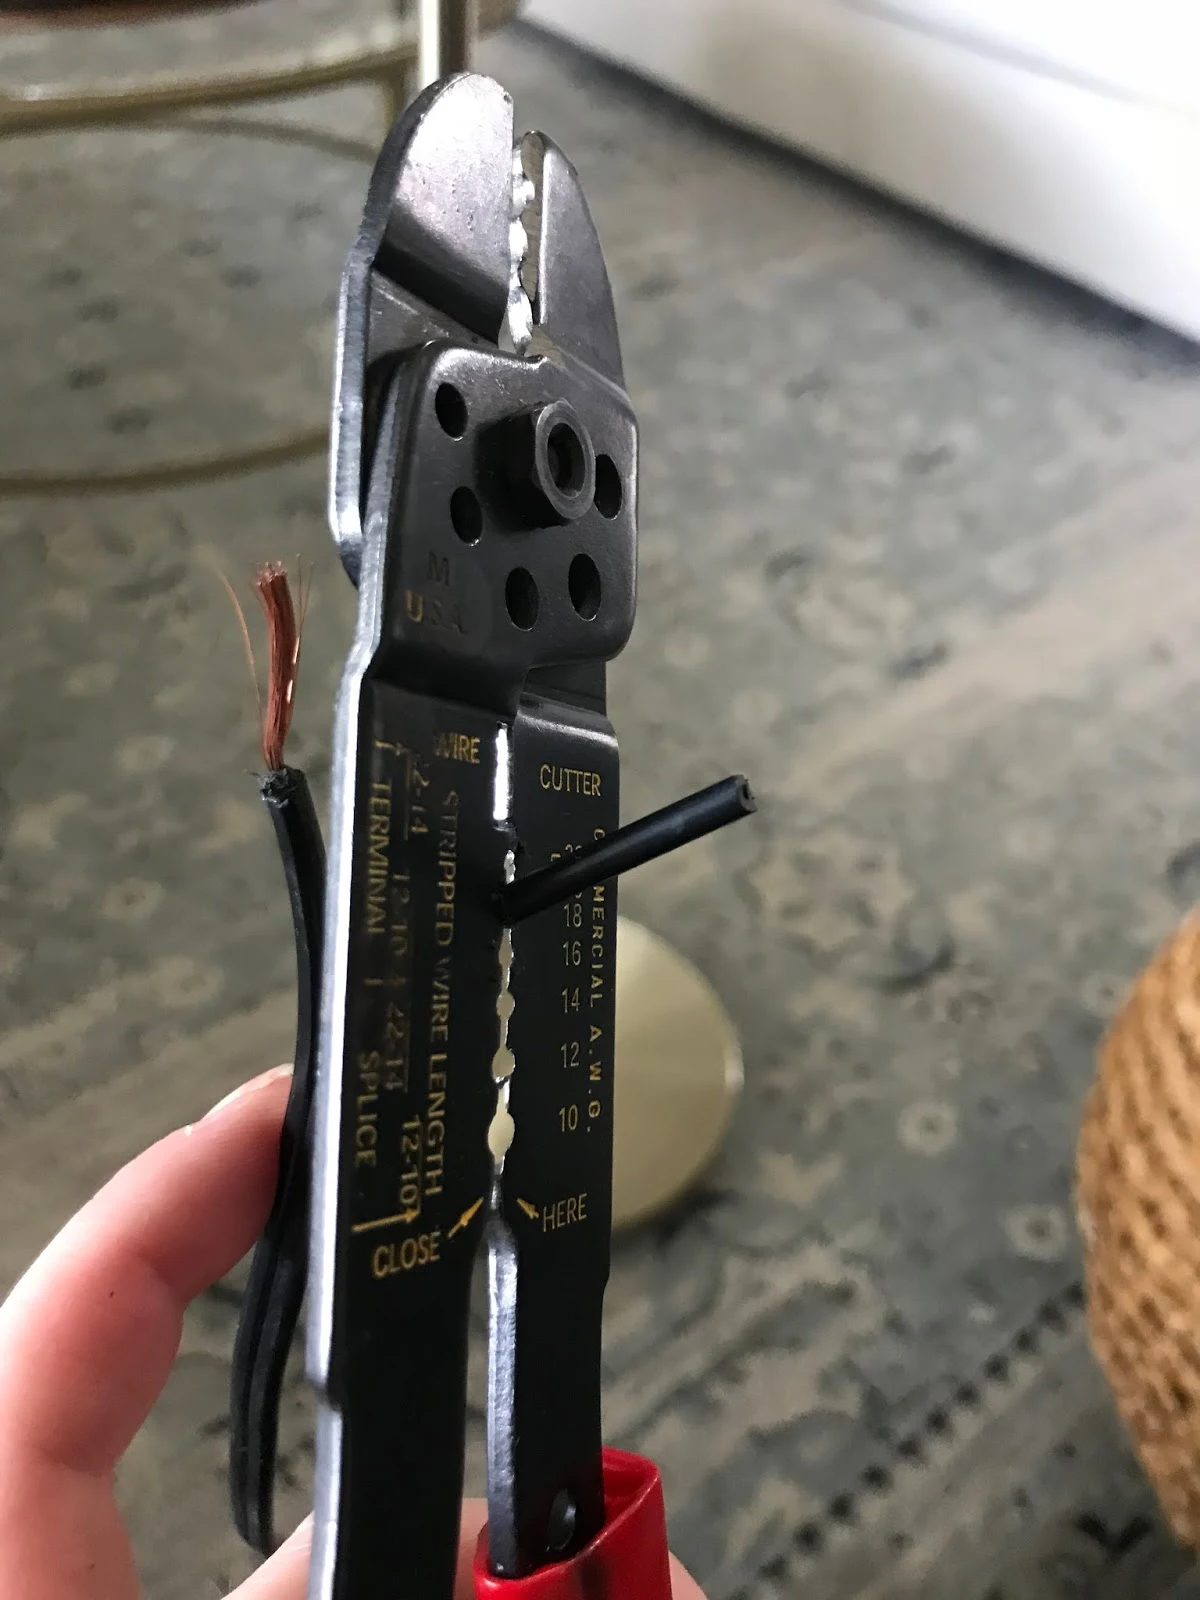 Wire cutters for replacing a plug